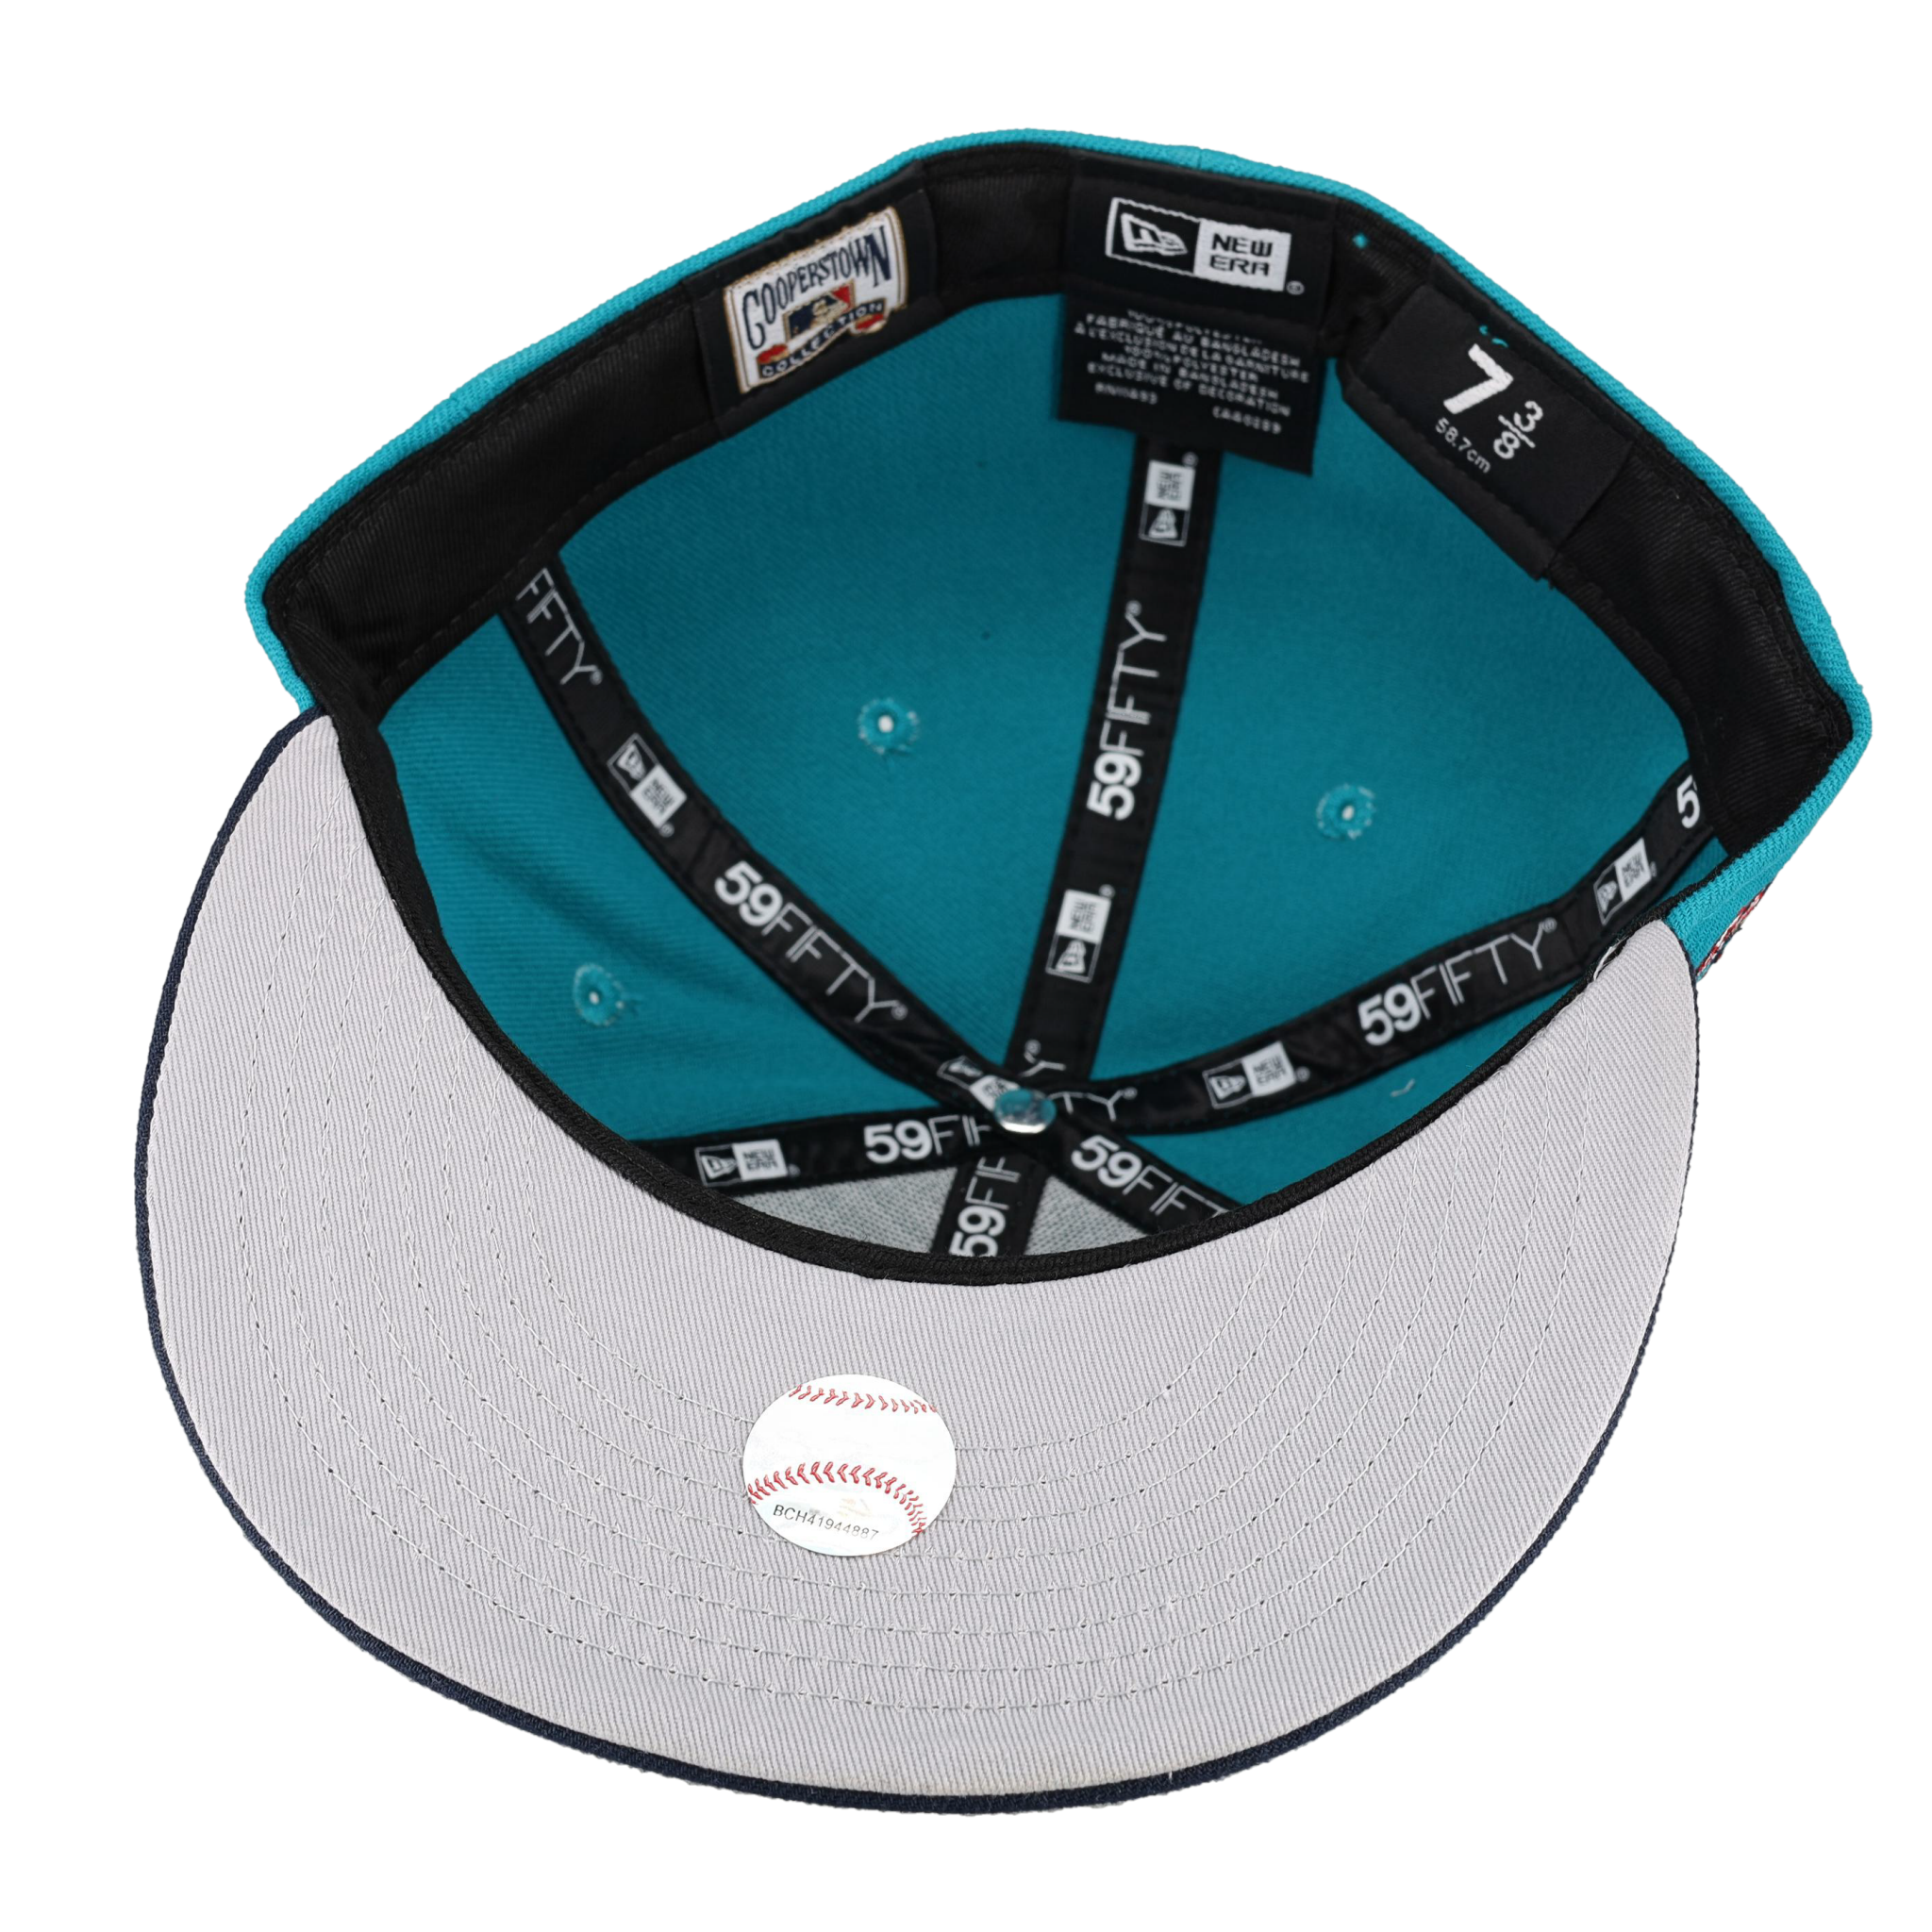 New Era St Louis Cardinals Capsule Teal Collection 1931 World